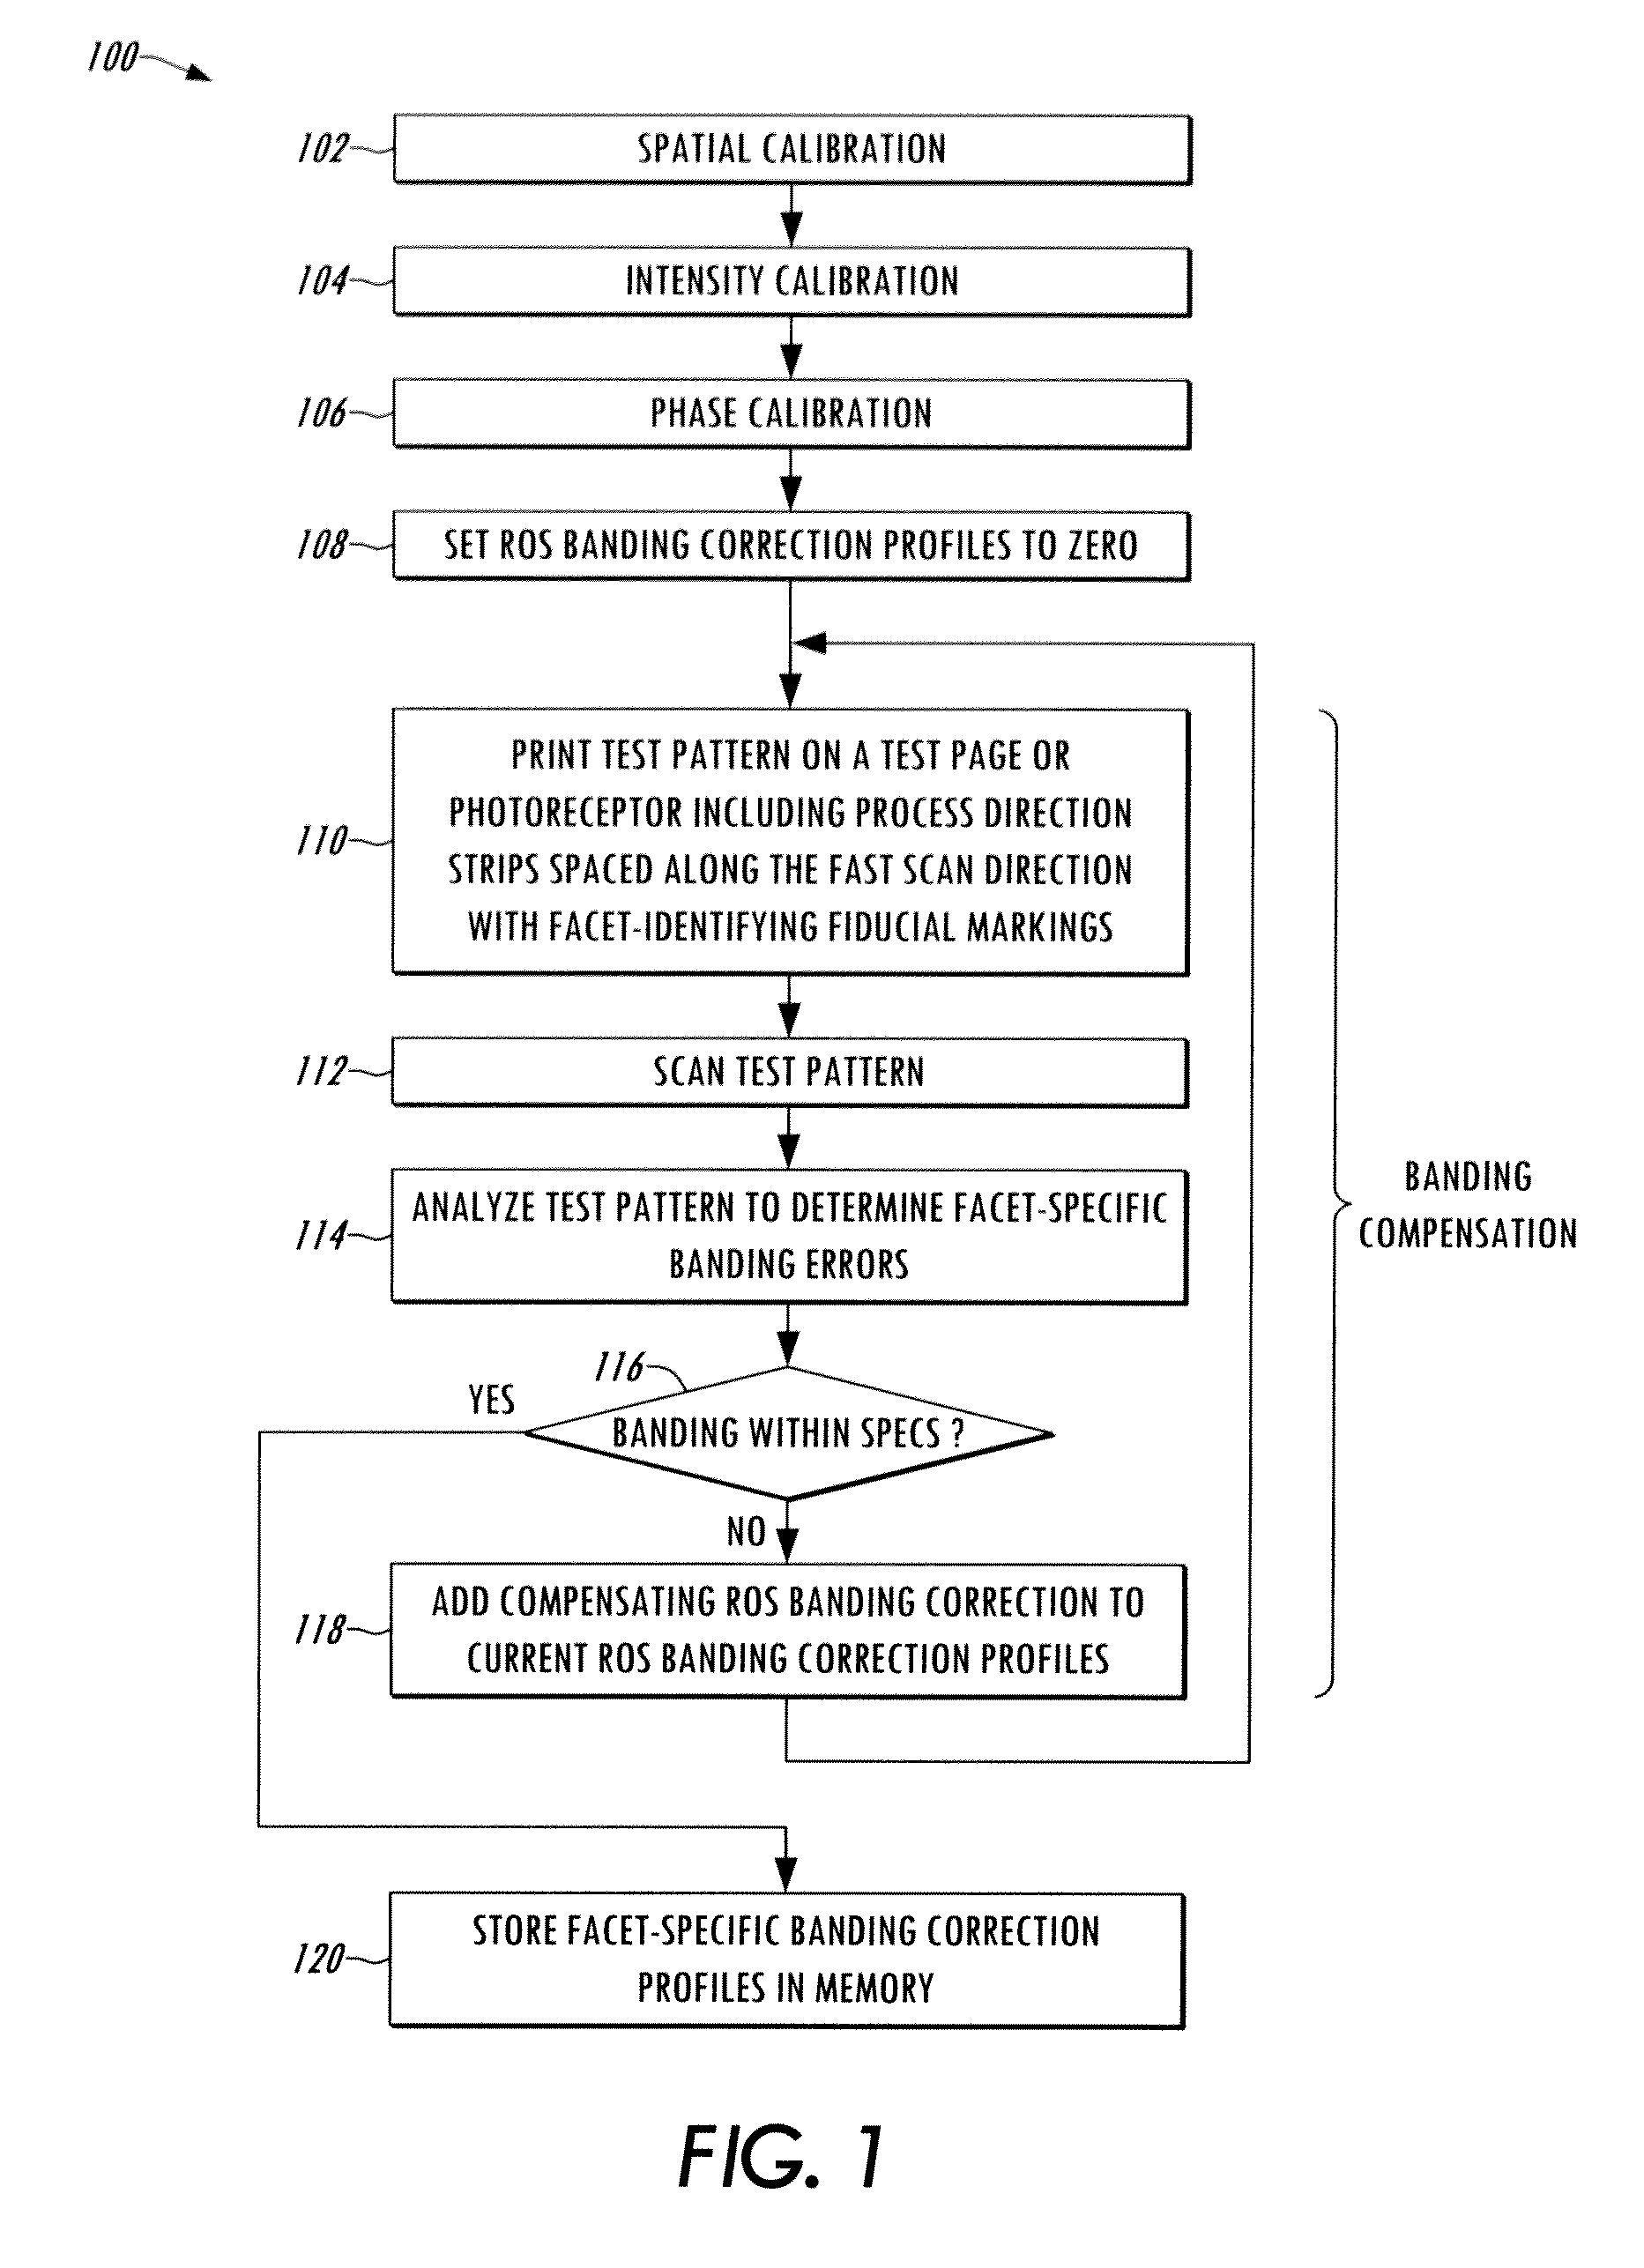 Process for creating facet-specific electronic banding compensation profiles for raster output scanners